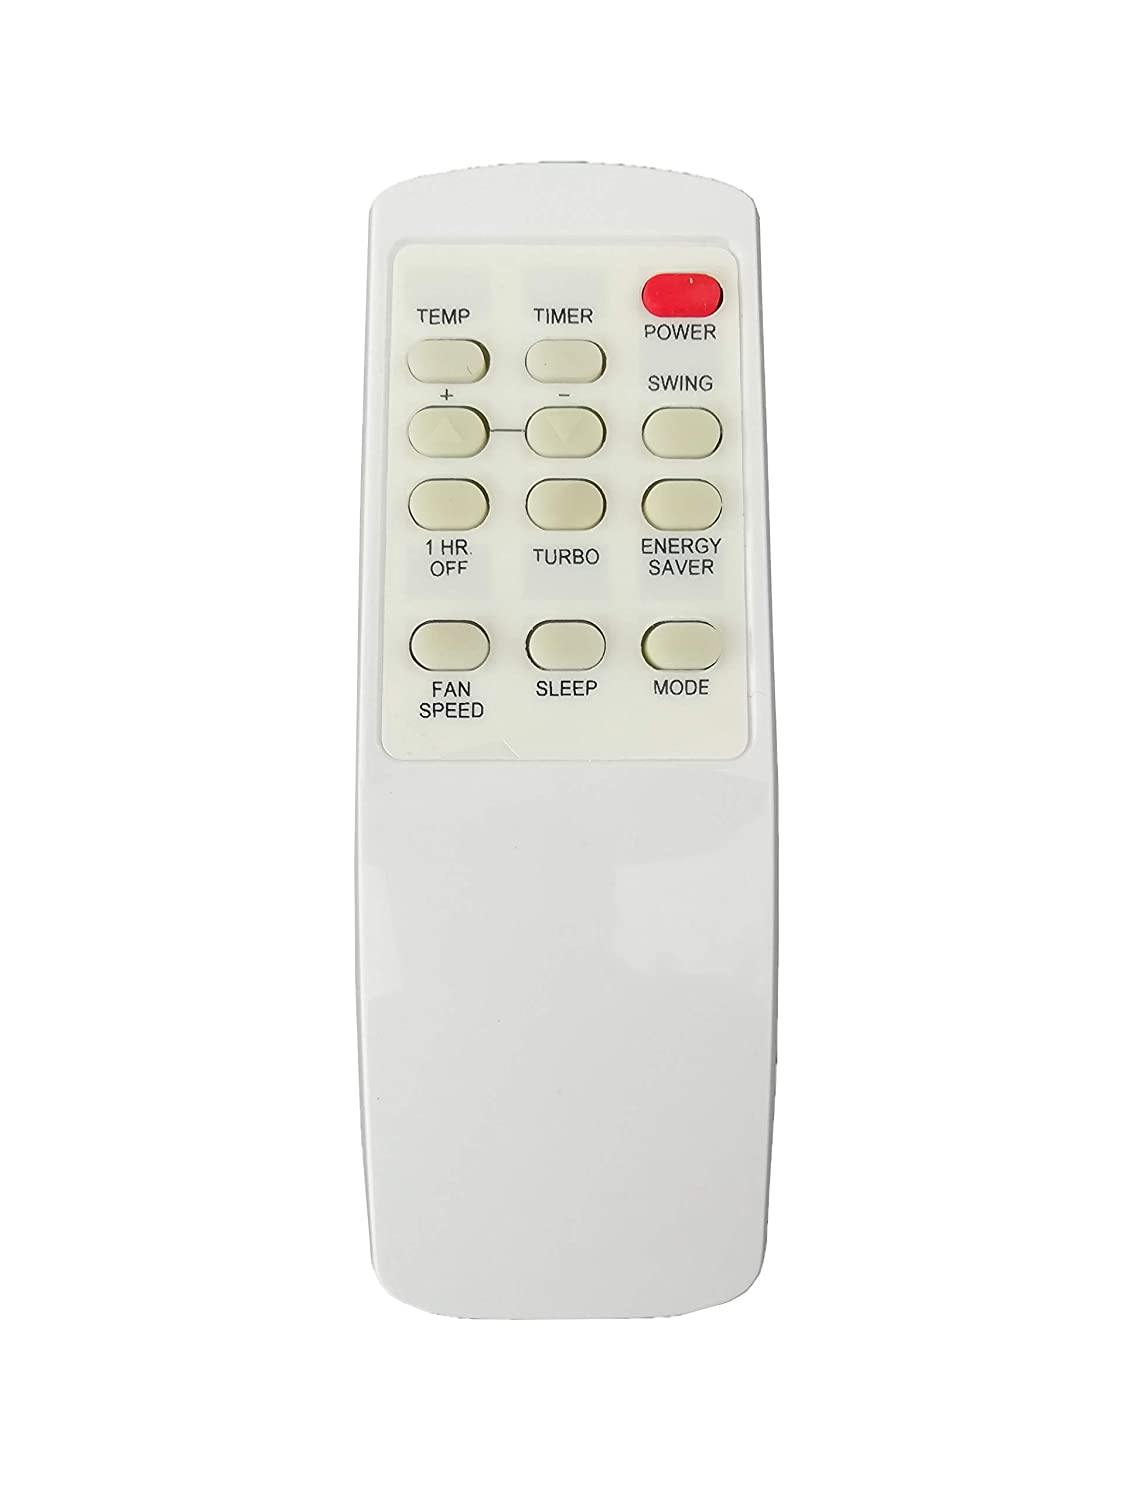 Replacement Voltas AC Remote - China Air Conditioner Remotes :: Cheapest AC Remote Solutions